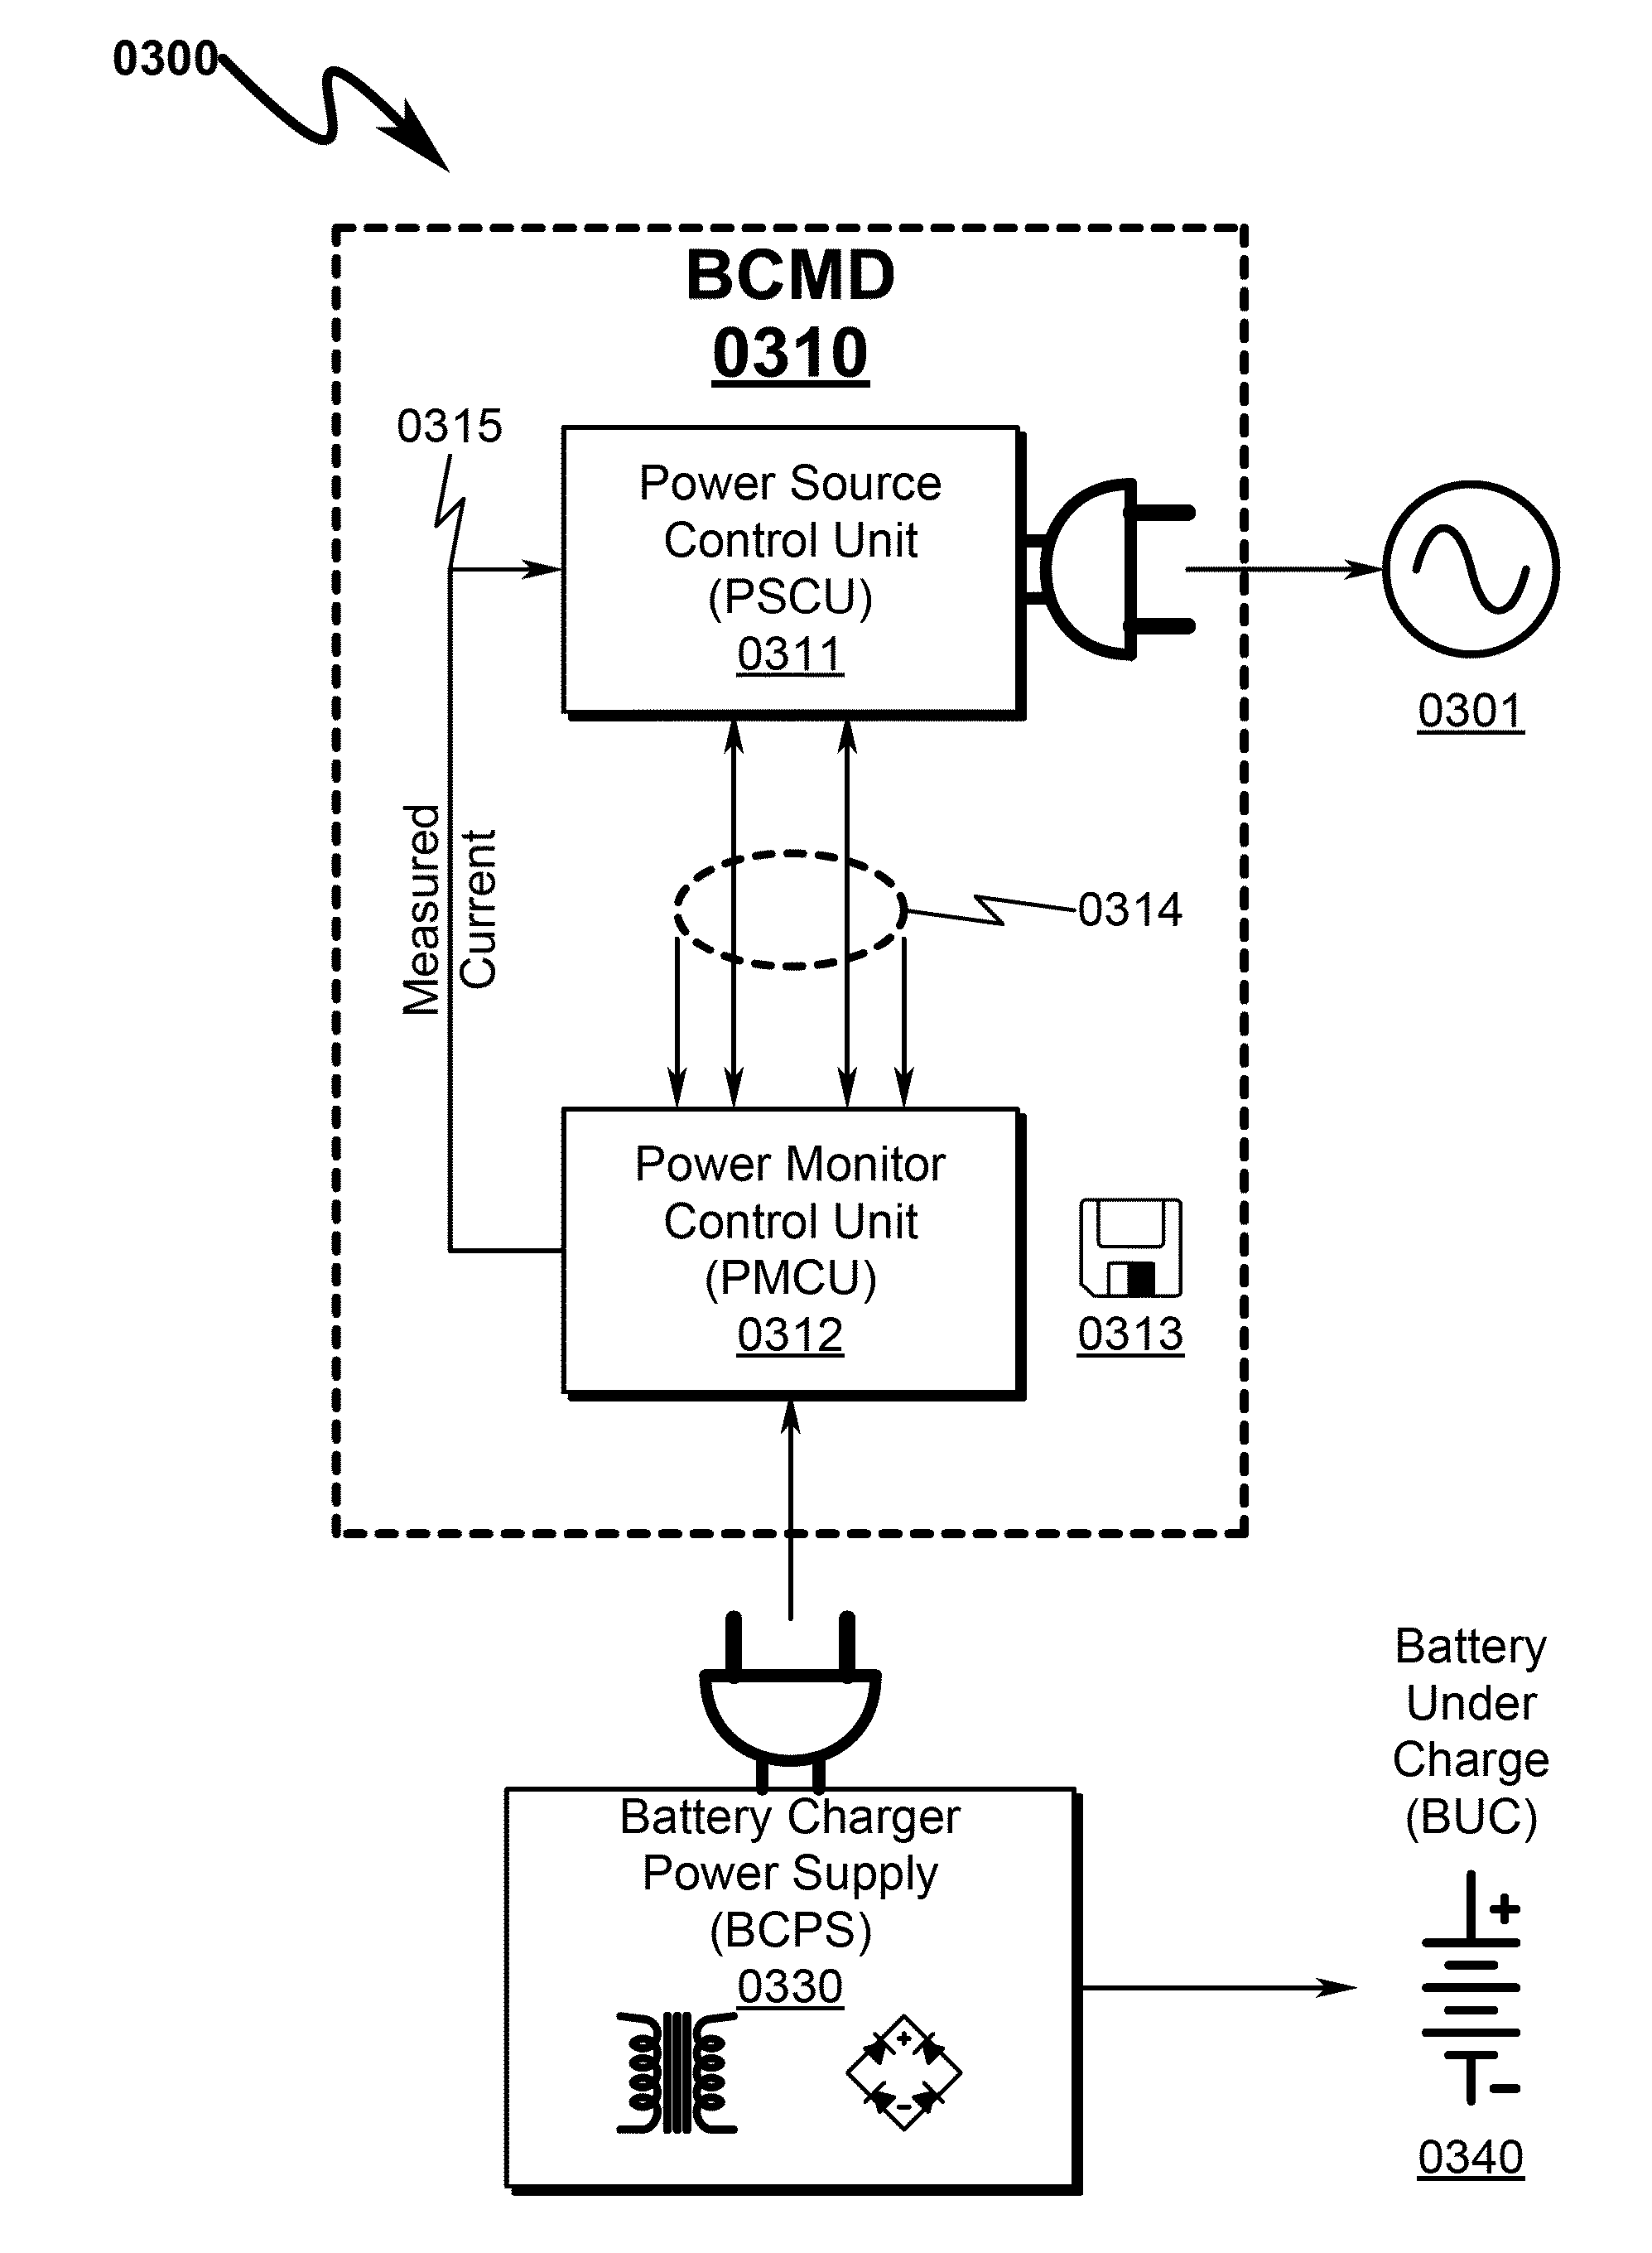 Battery charger management system and method